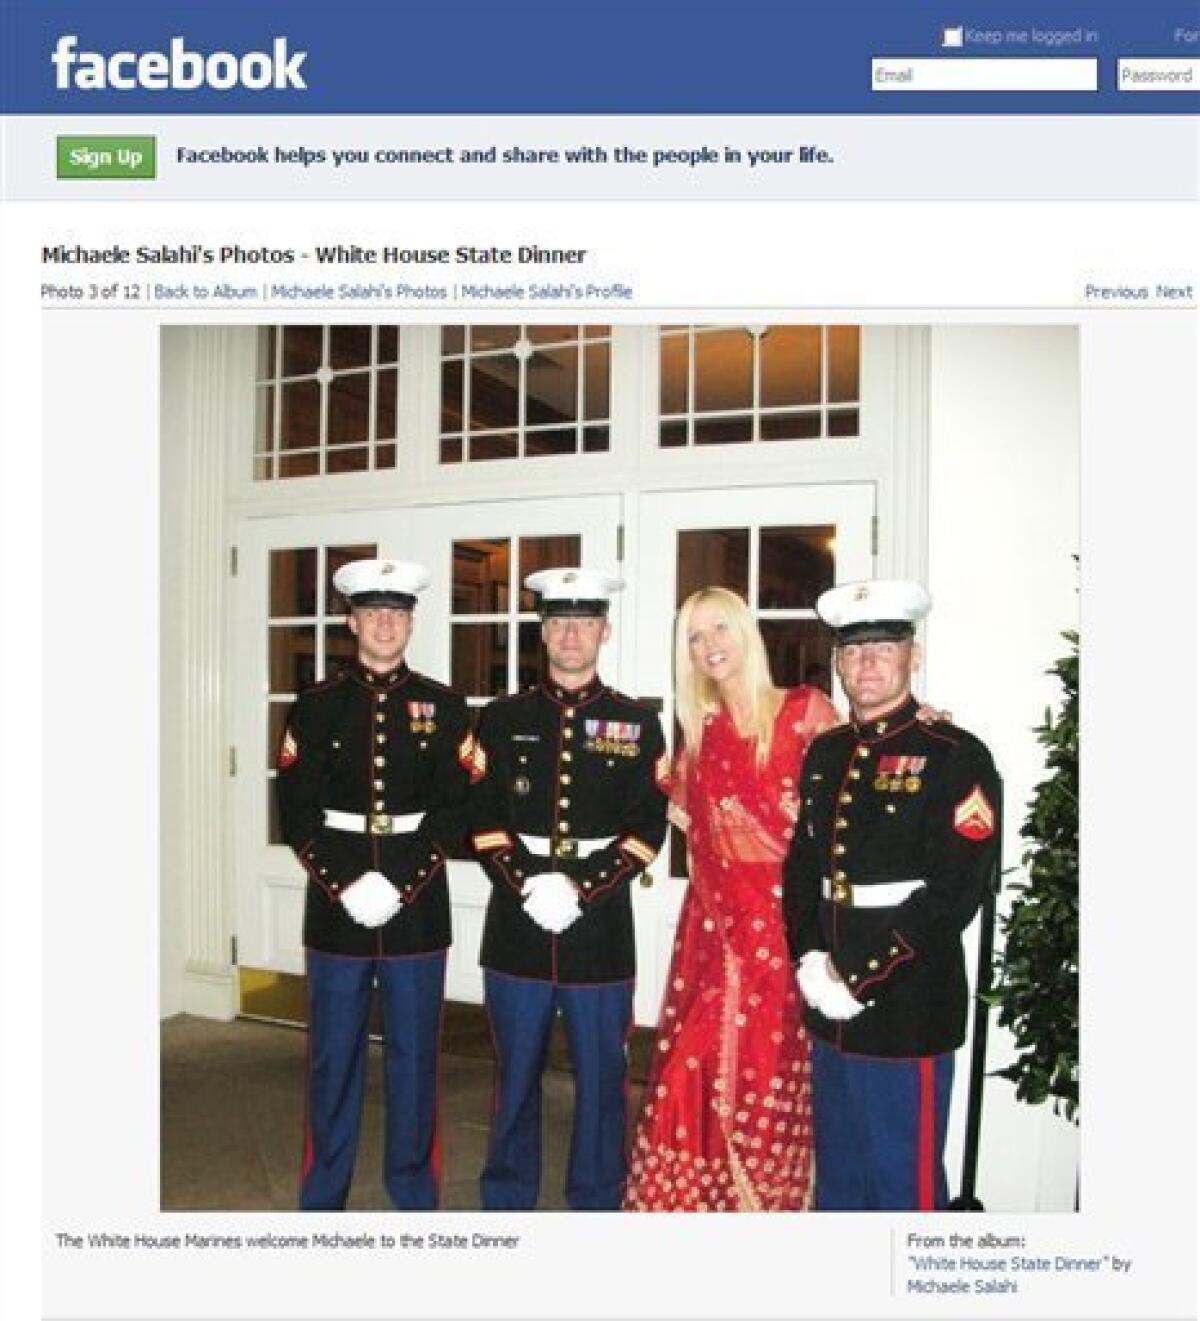 This screen image made from Michaele Salahi's Facebook page shows a photo of Michaele Salahi, second right, with three Marines during arrivals at the White House state dinner in Washington on Tuesday Nov. 24, 2009. The Secret Service is looking into its own security procedures after determining that a Virginia couple, Michaele and Tareq Salahi, managed to slip into Tuesday night's state dinner at the White House even though they were not on the guest list, agency spokesman Ed Donovan said. (AP Photo) NO SALES